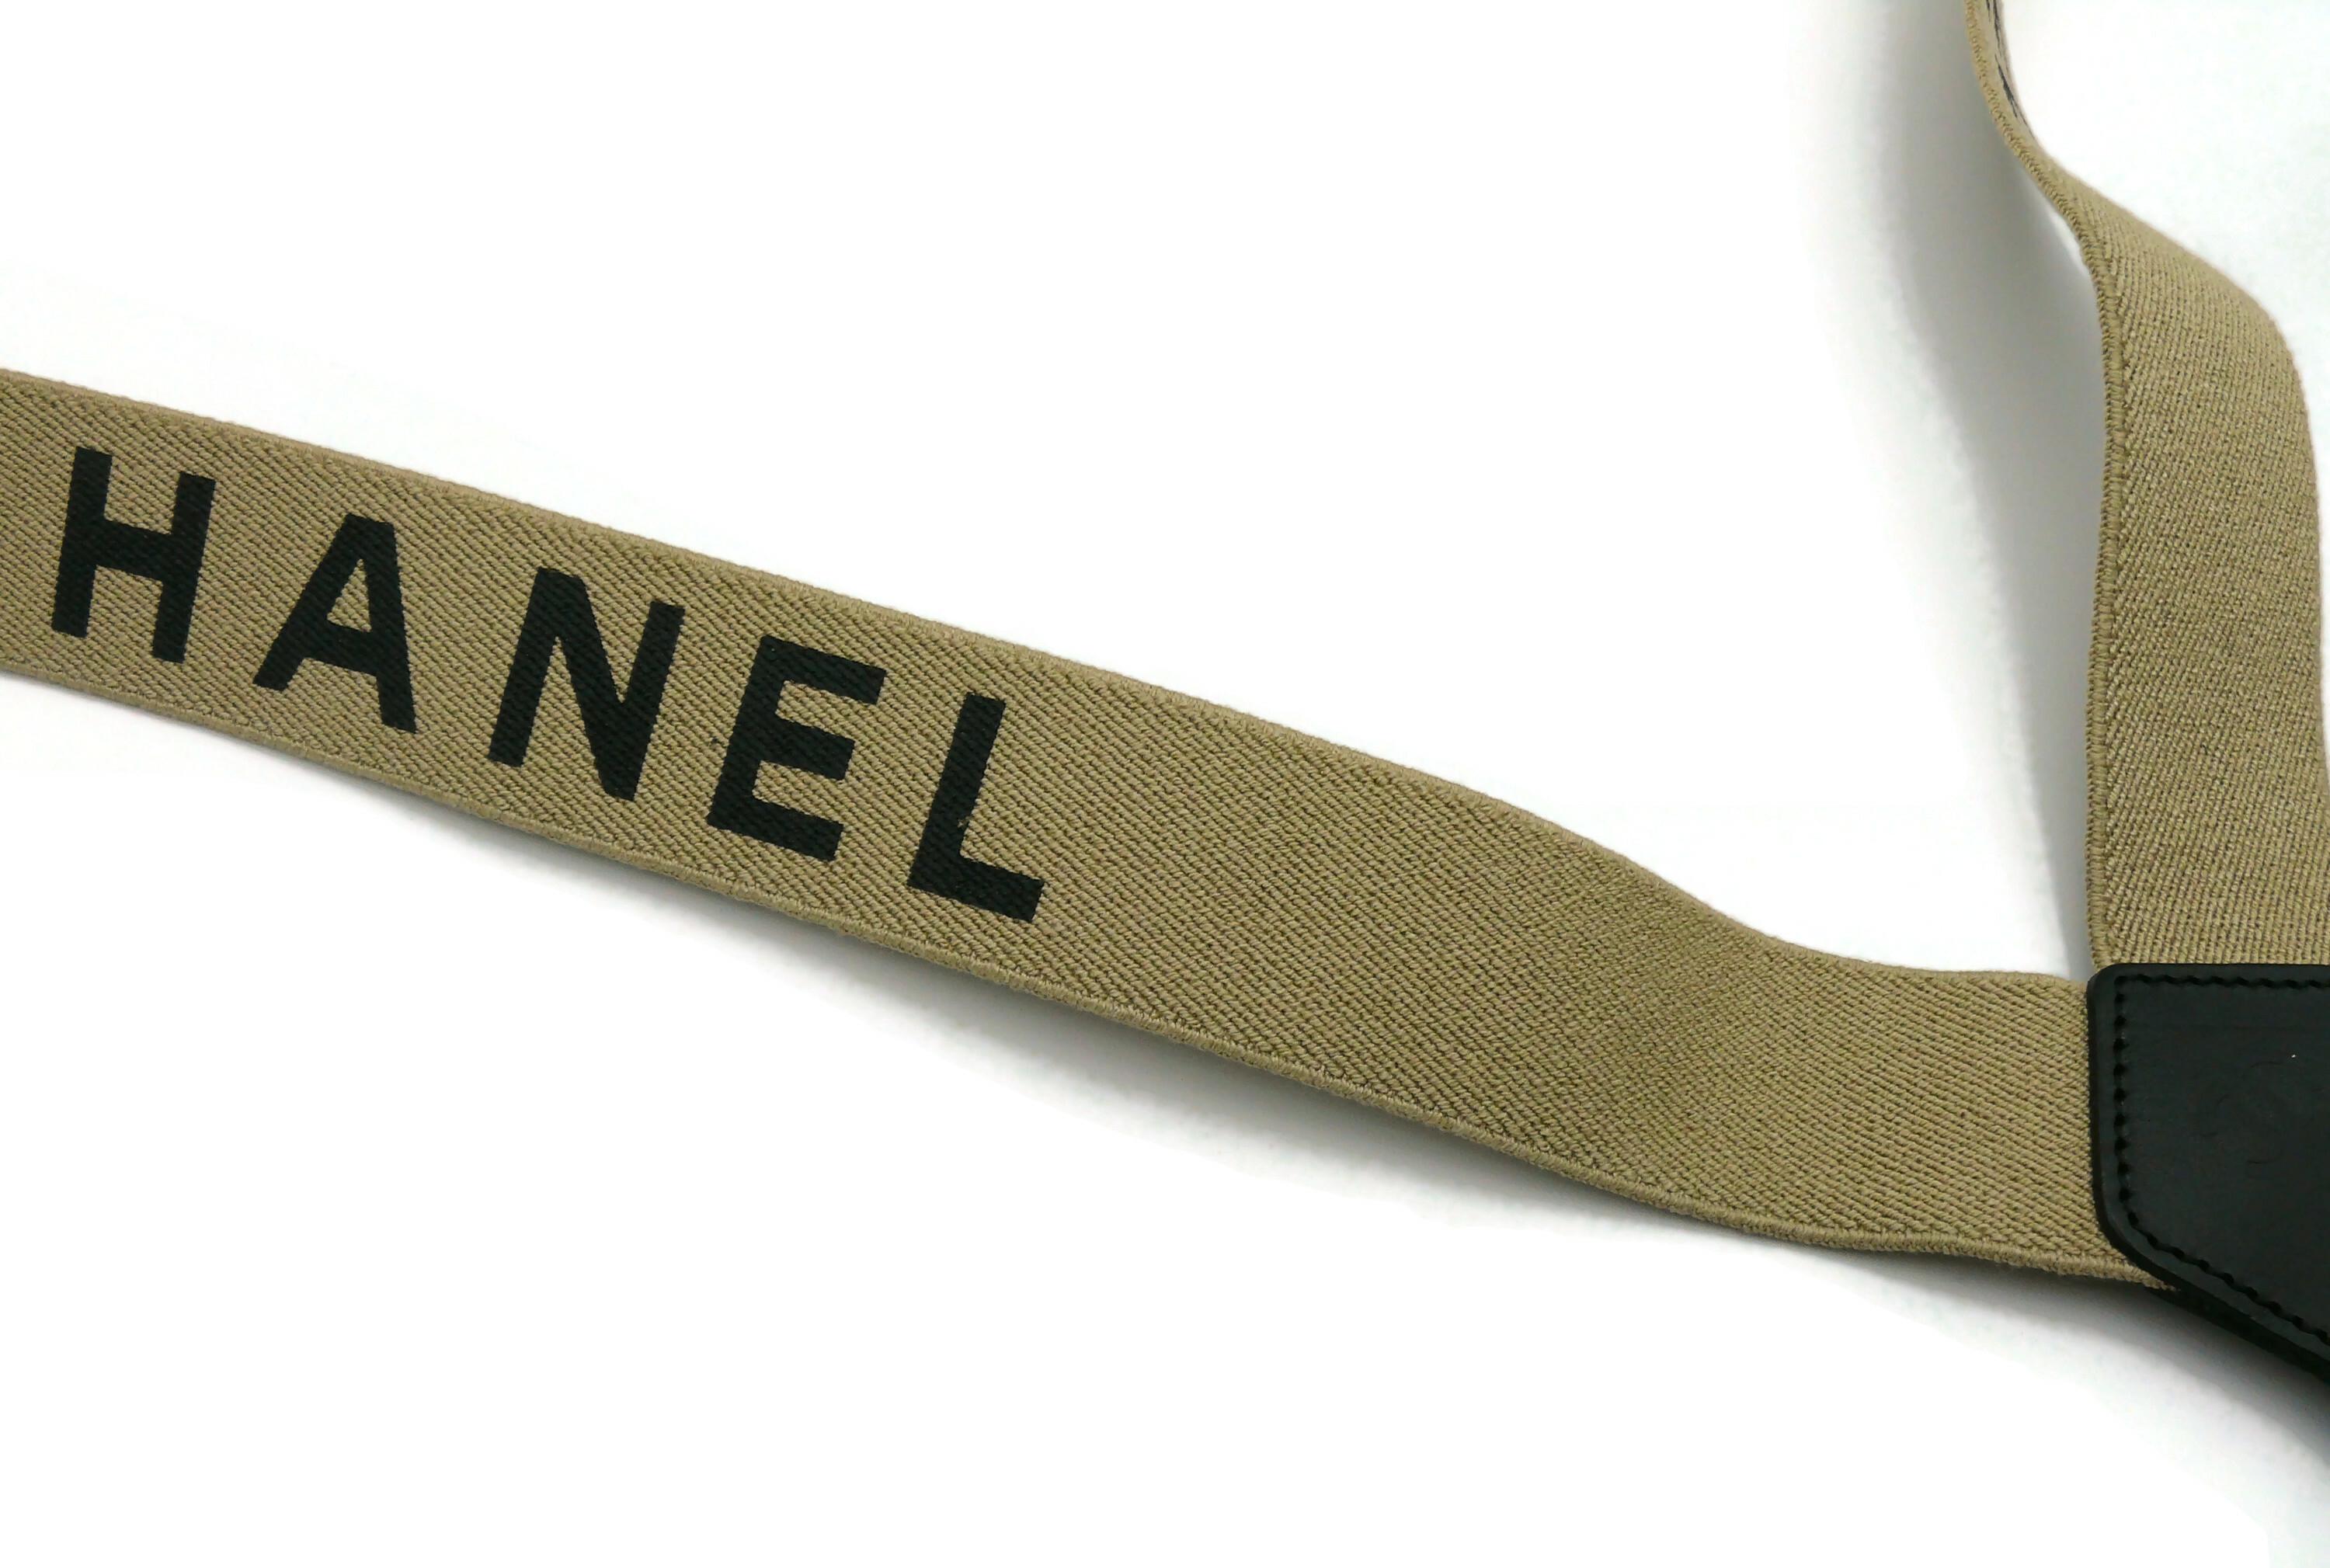 CHANEL by KARL LAGERFELD Vintage Iconic Light Brown and Black Suspenders, 1994 im Angebot 4